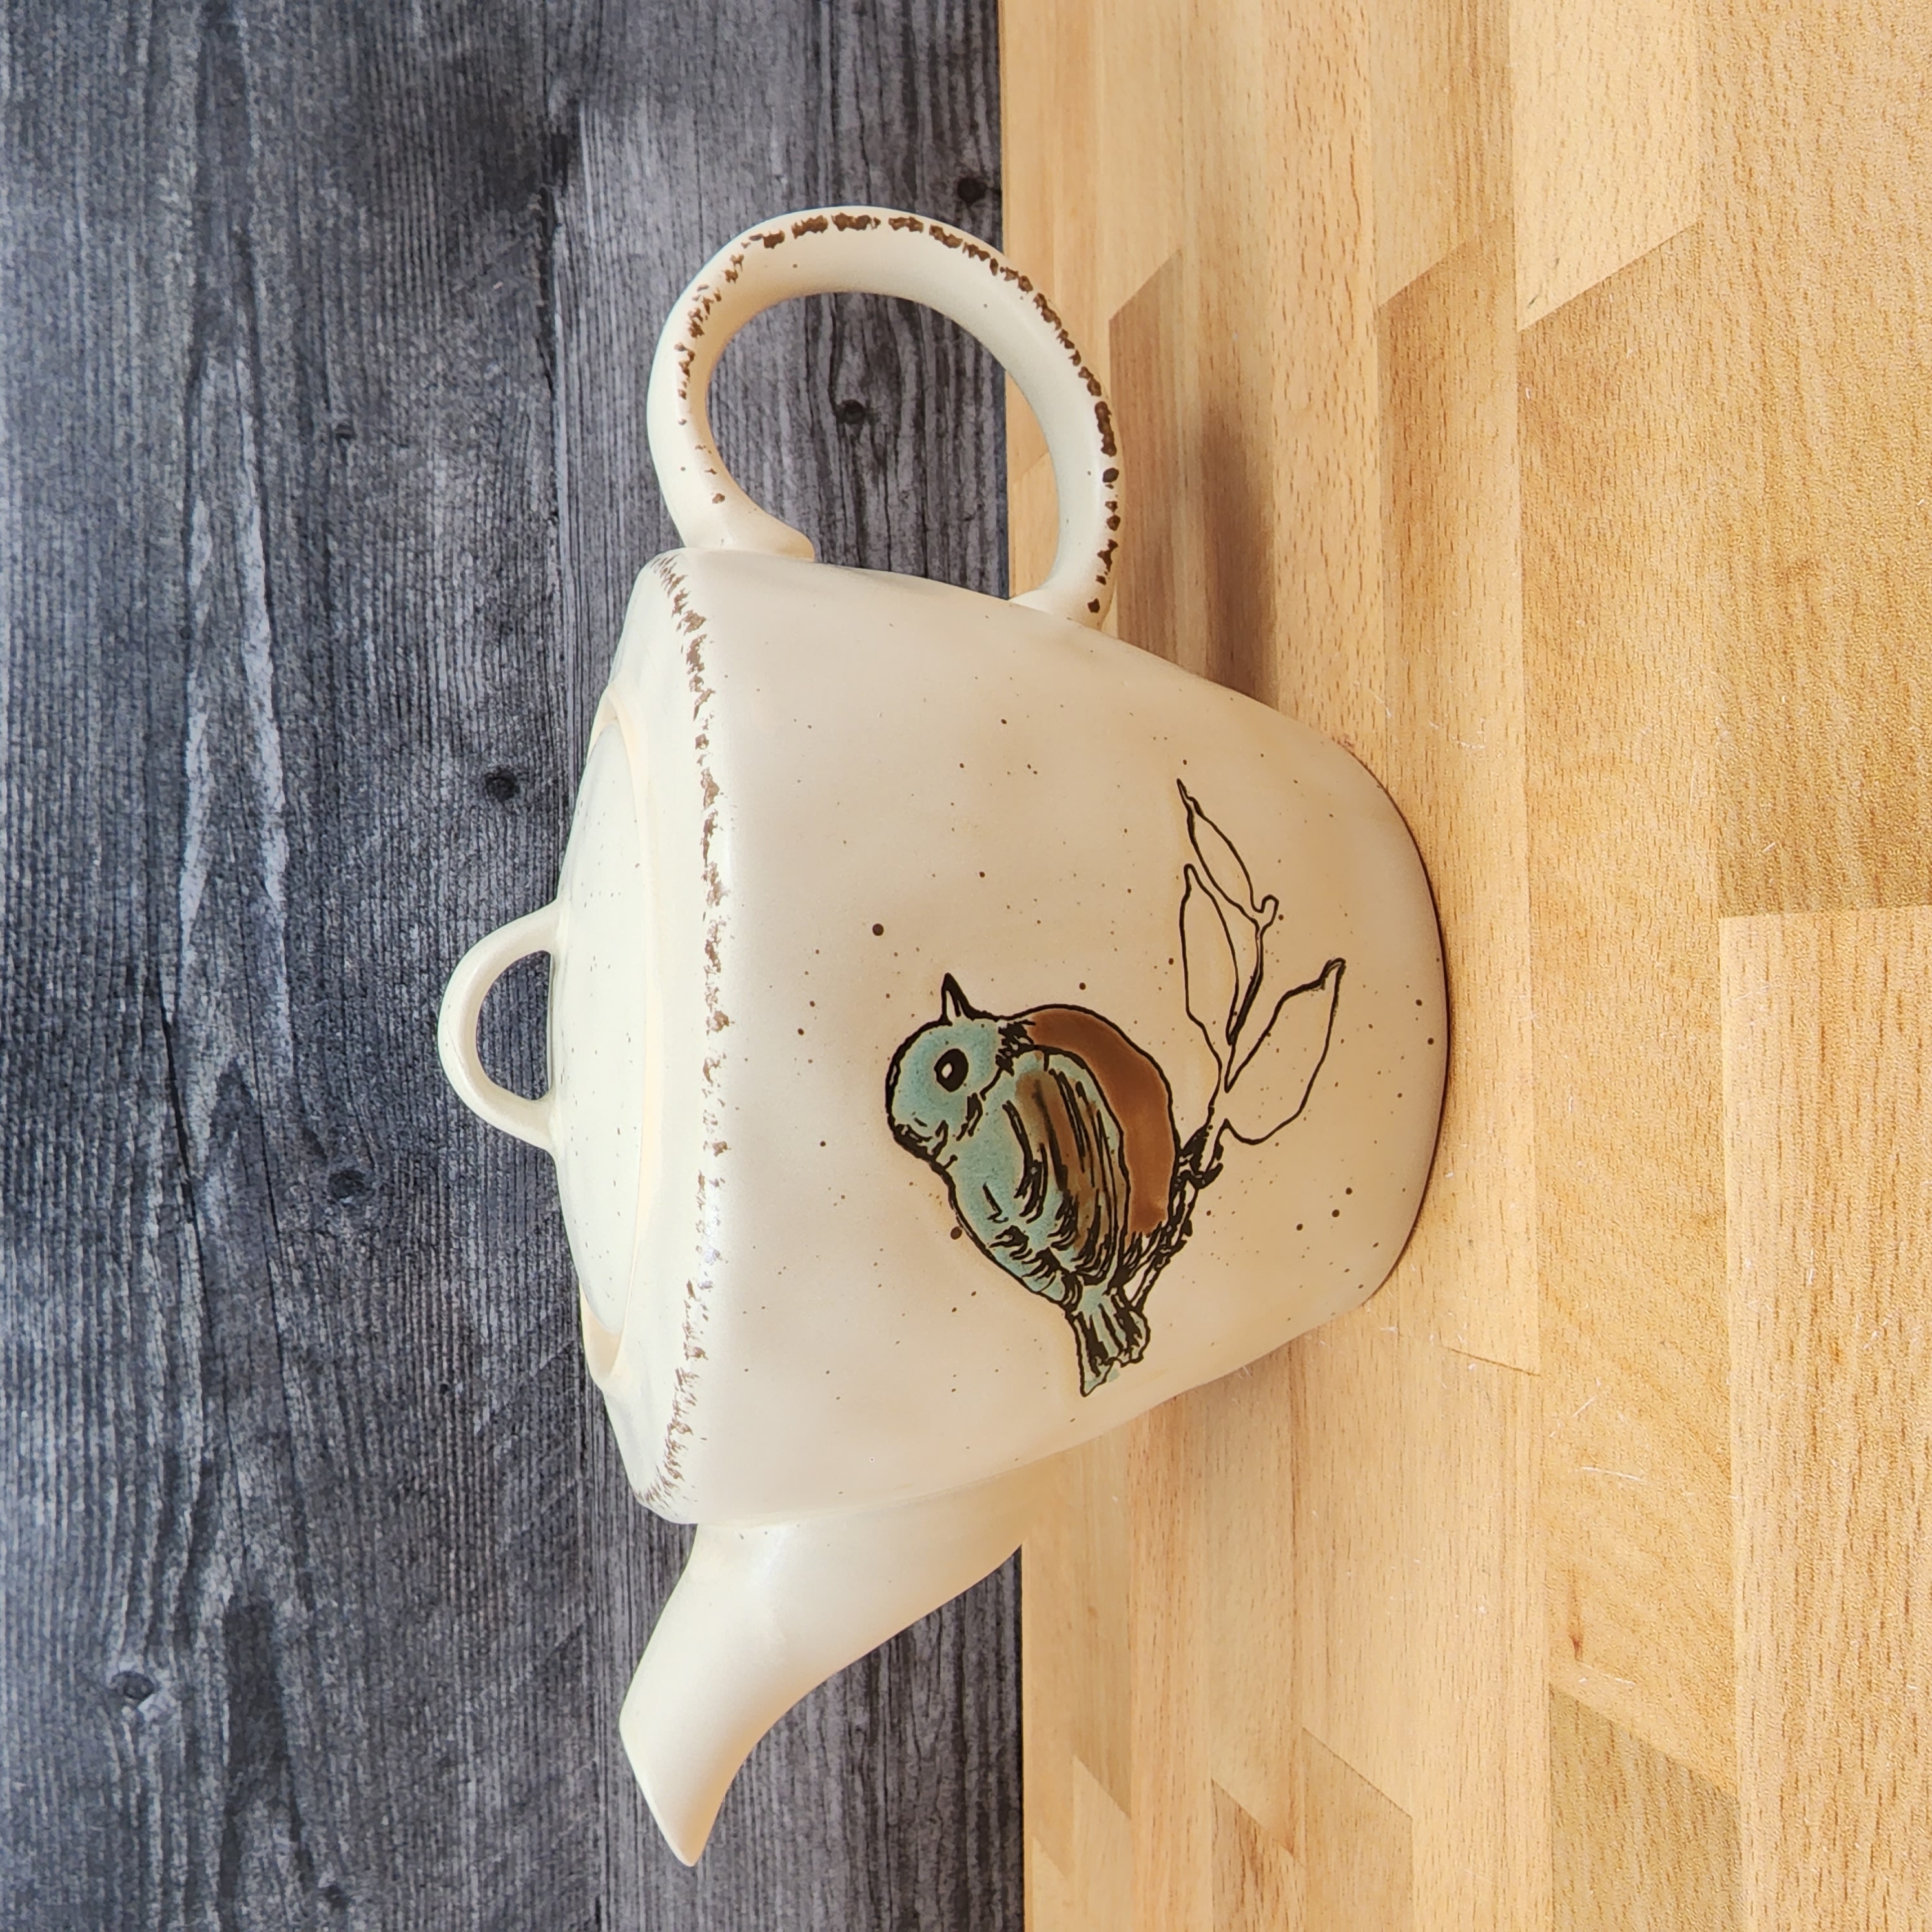 This Embossed Bird Teapot Kitchen Decorative Collectable by Blue Sky is made with love by Premier Homegoods! Shop more unique gift ideas today with Spots Initiatives, the best way to support creators.